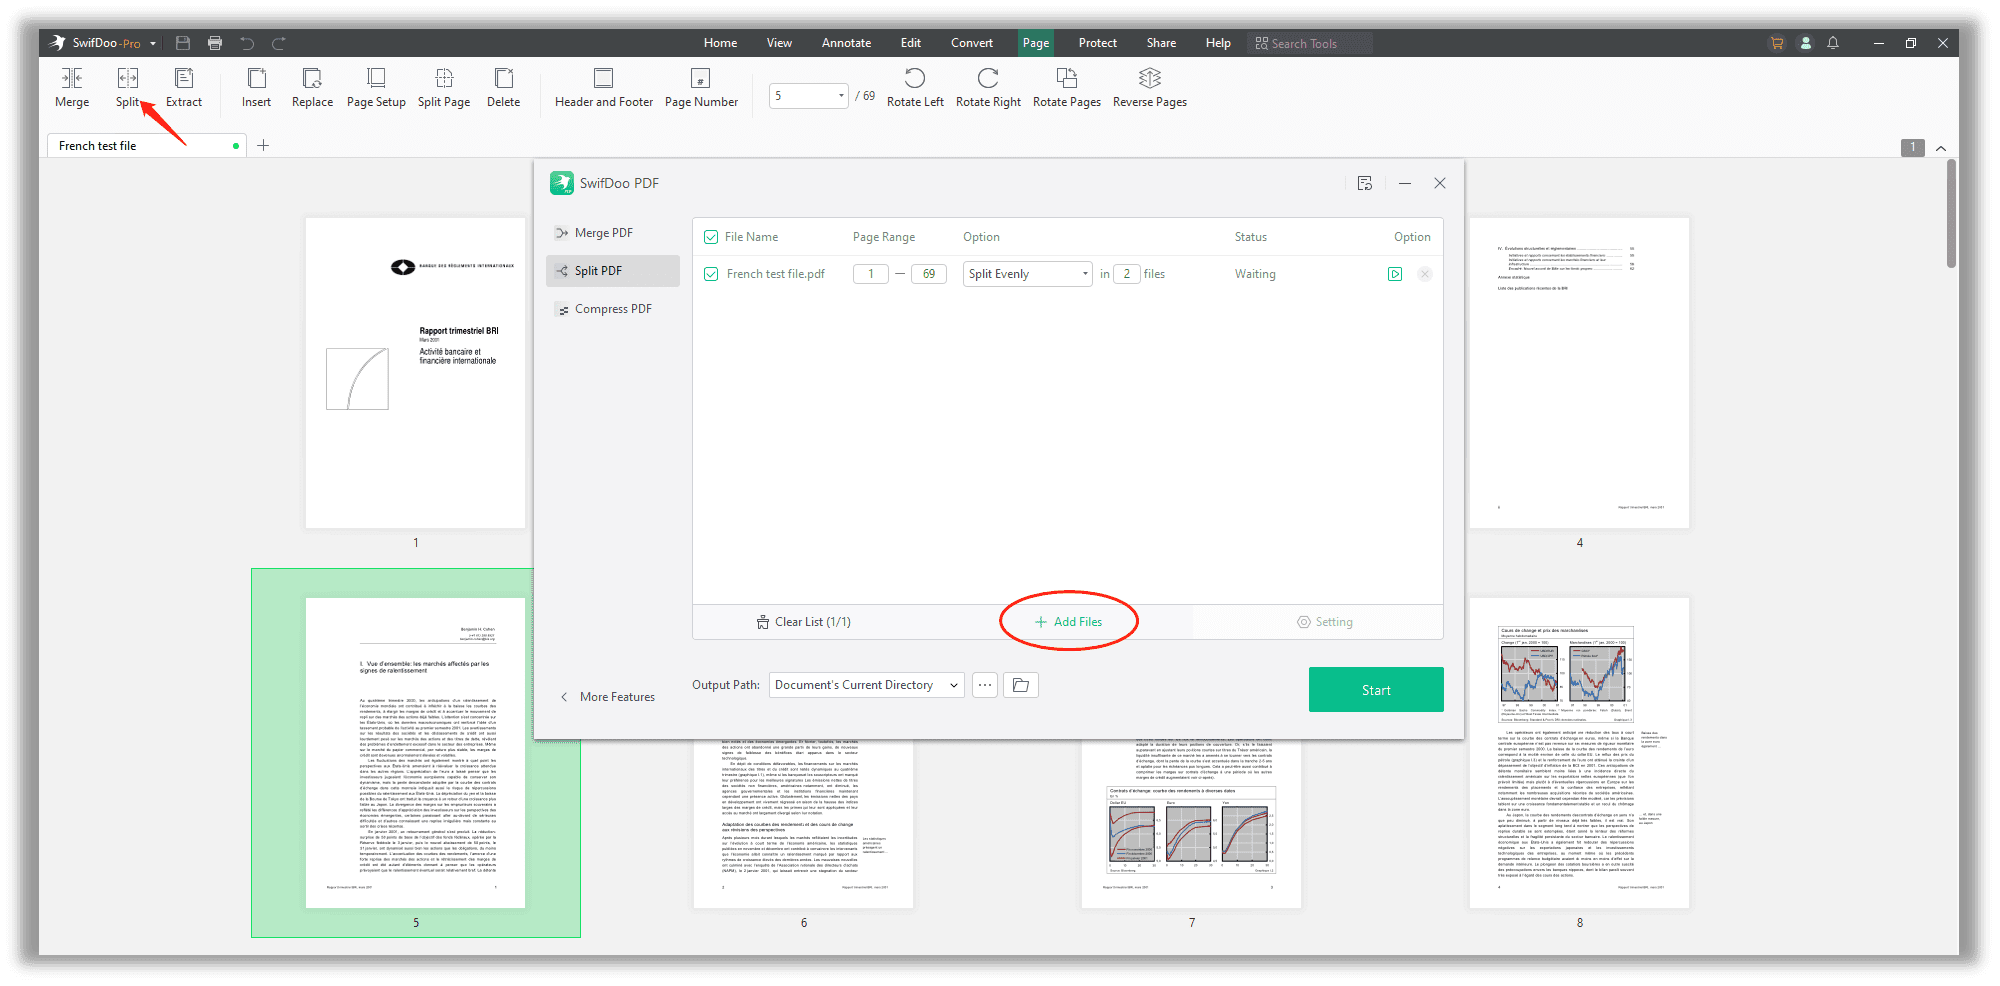 How to split PDF pages in SwifDoo PDF